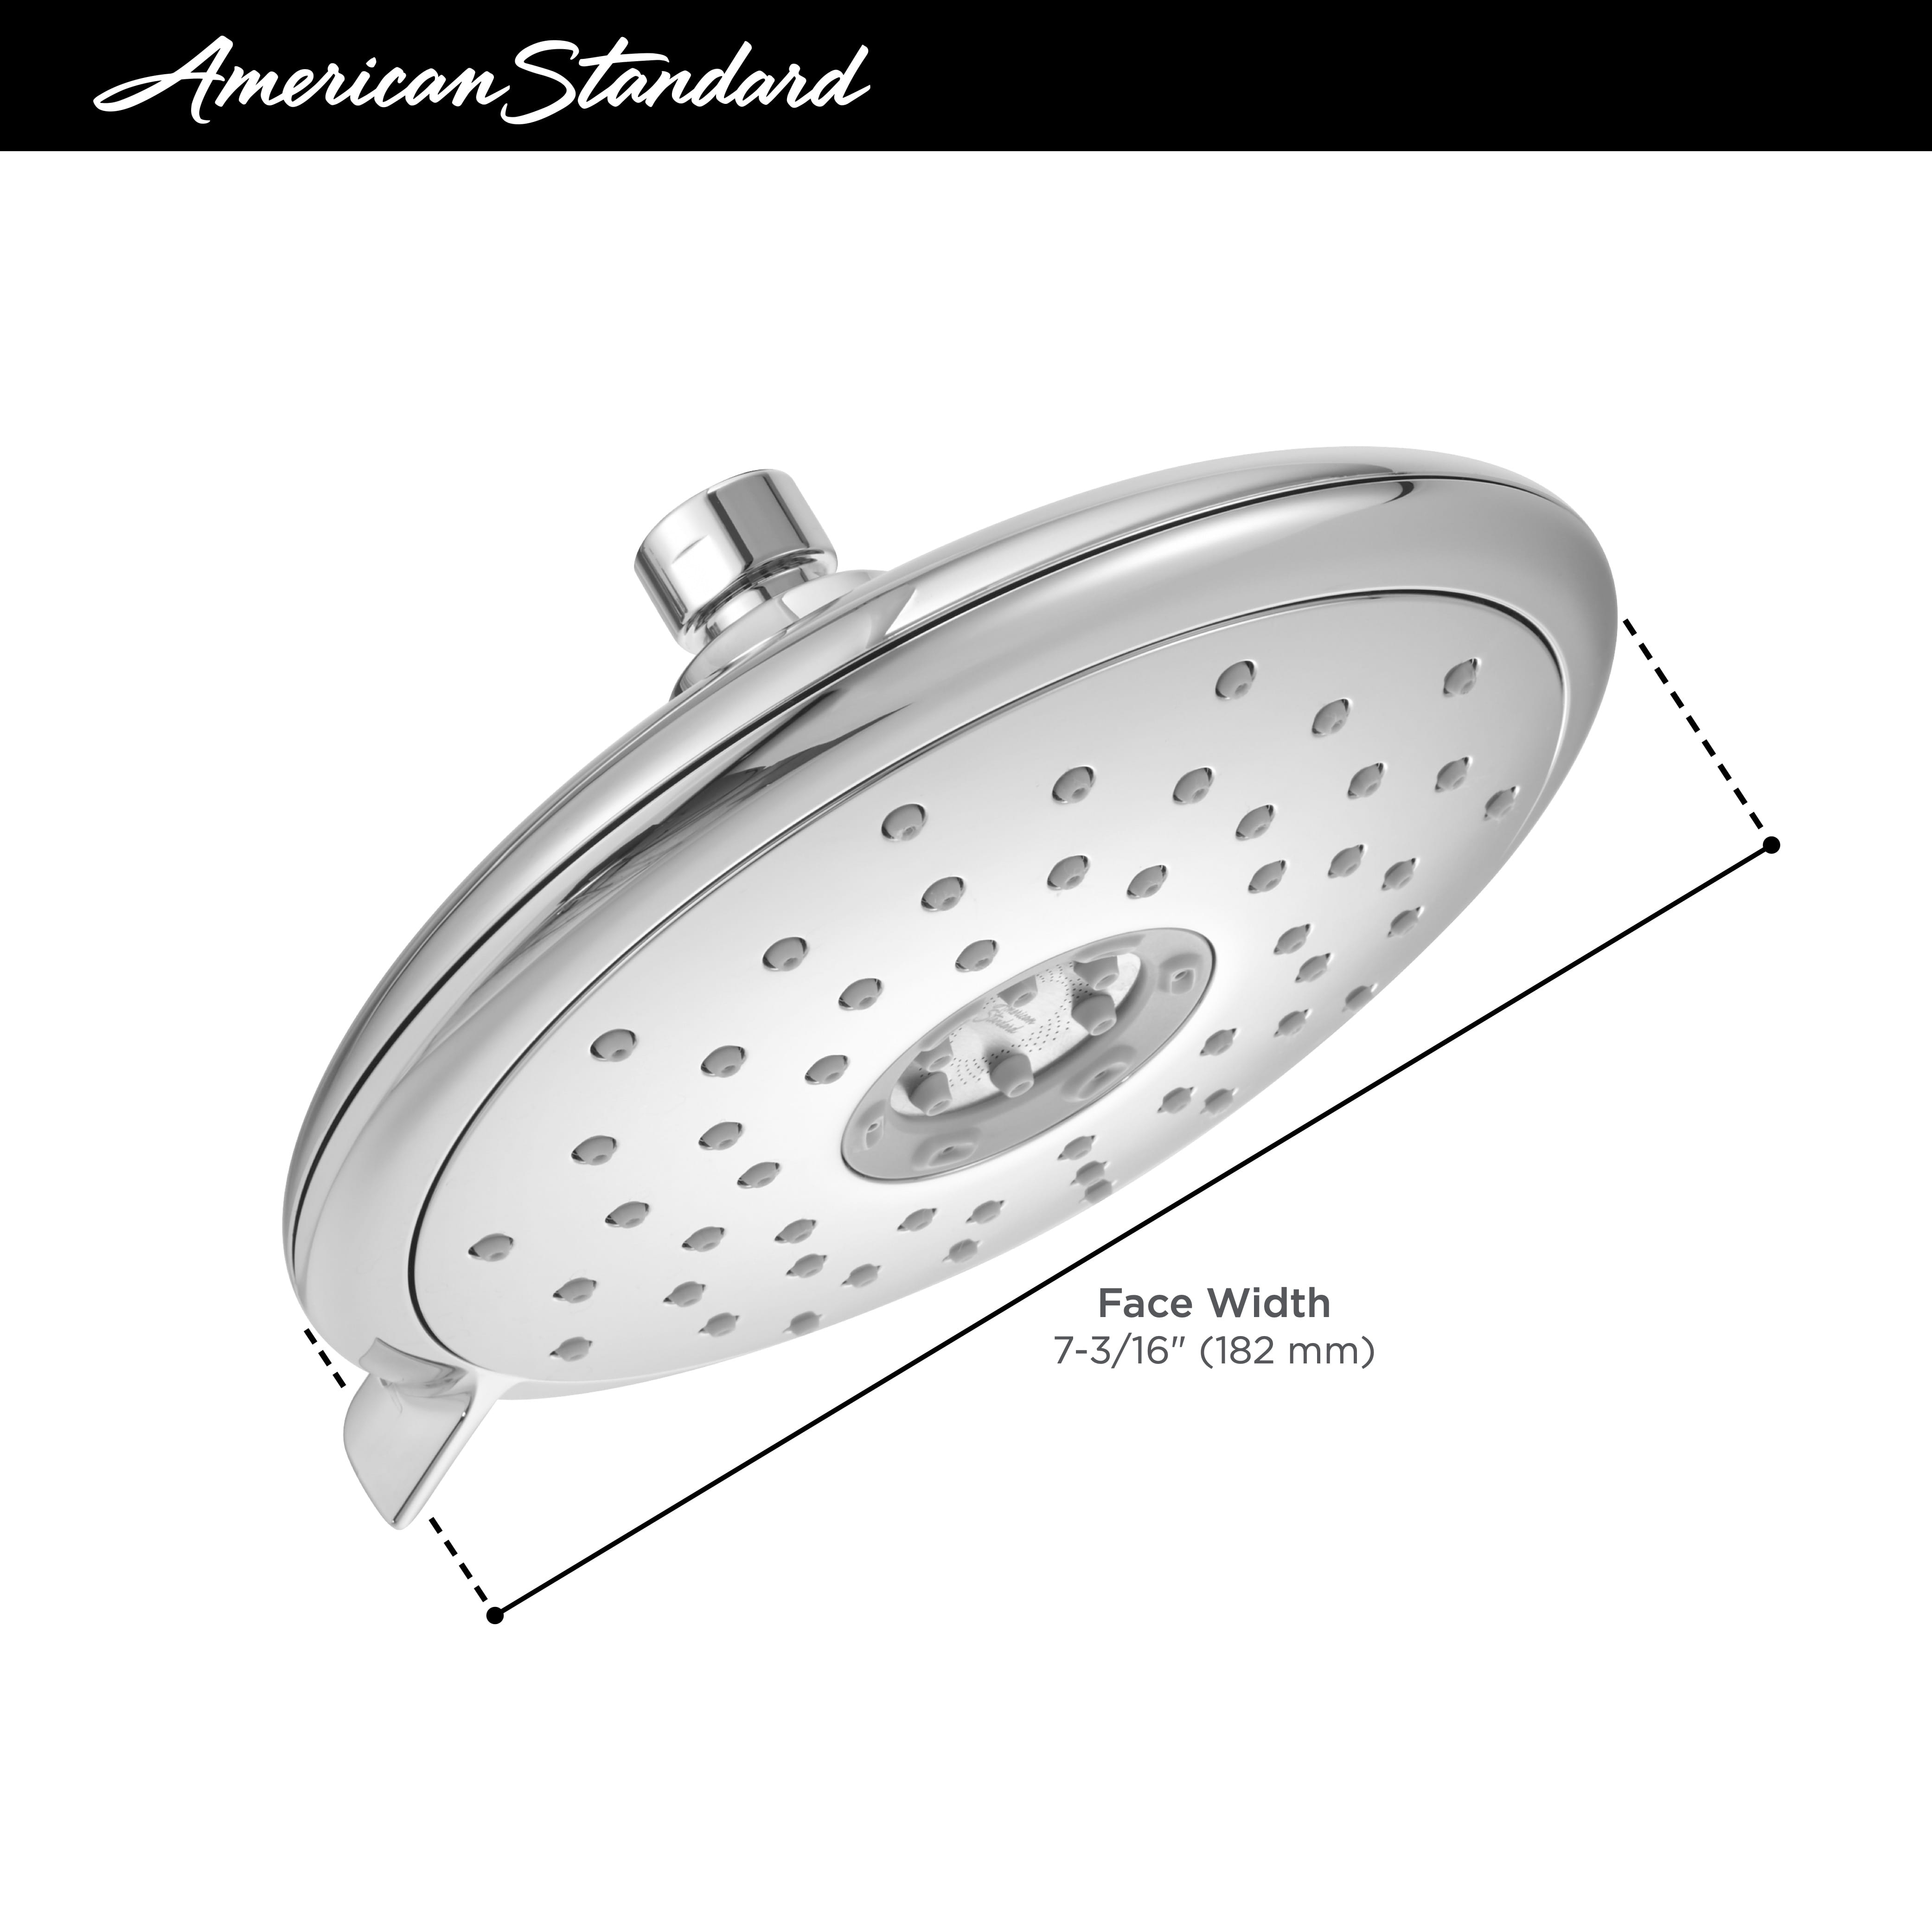 Spectra® Fixed 7-Inch 1.8 gpm/6.8 L/
min Fixed Showerhead